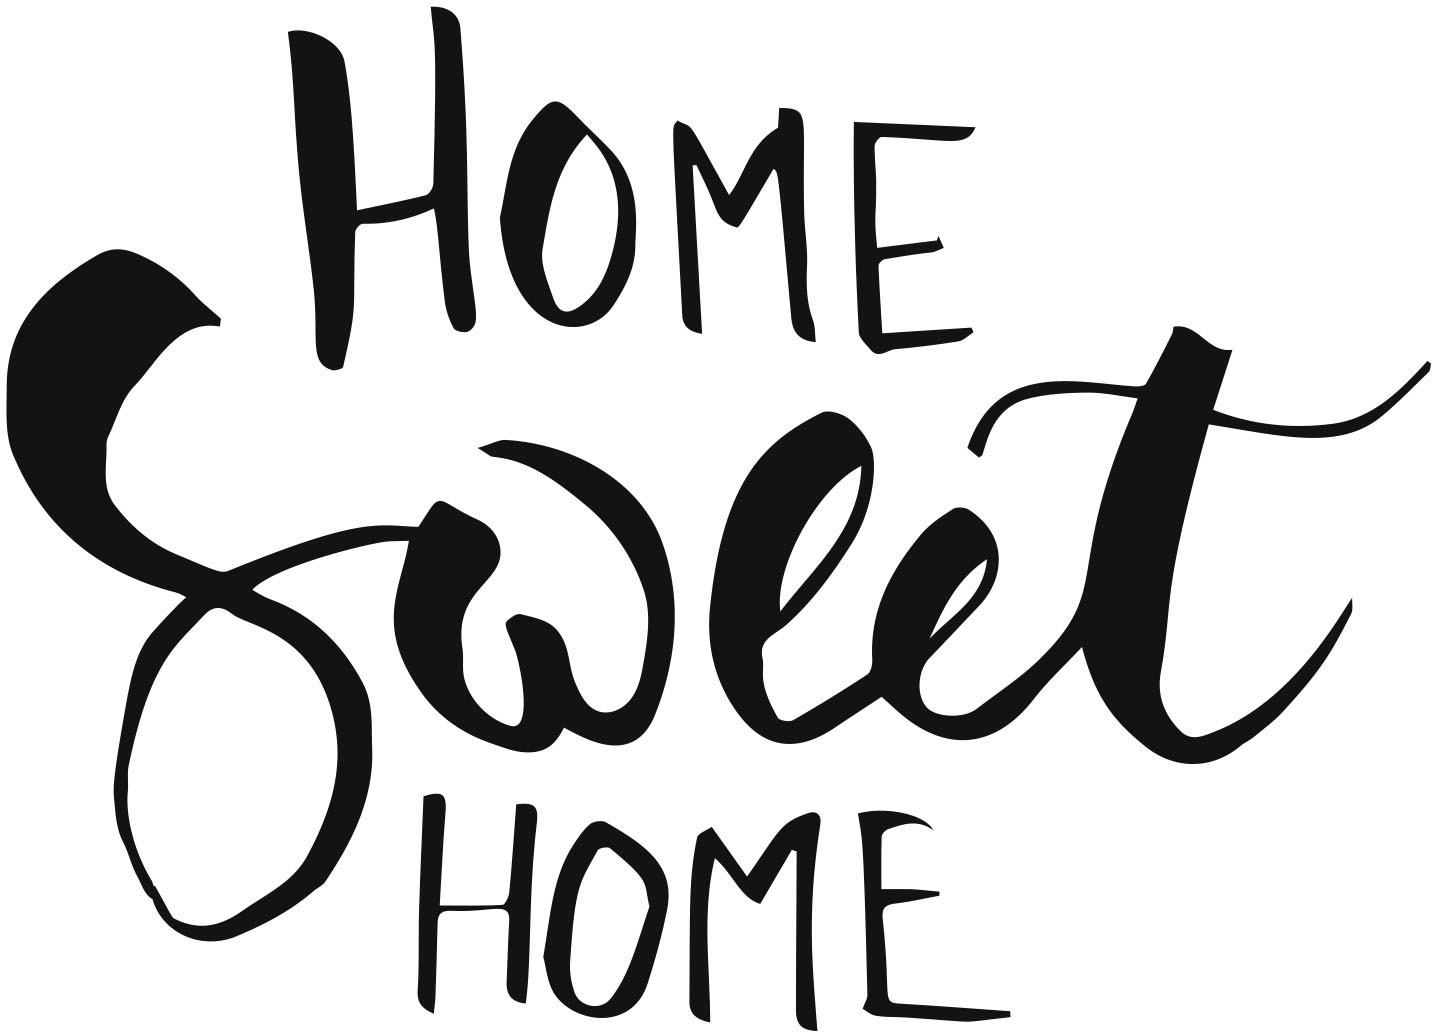 queence Wandtattoo »HOME SWEET HOME«, (1 St.) von queence